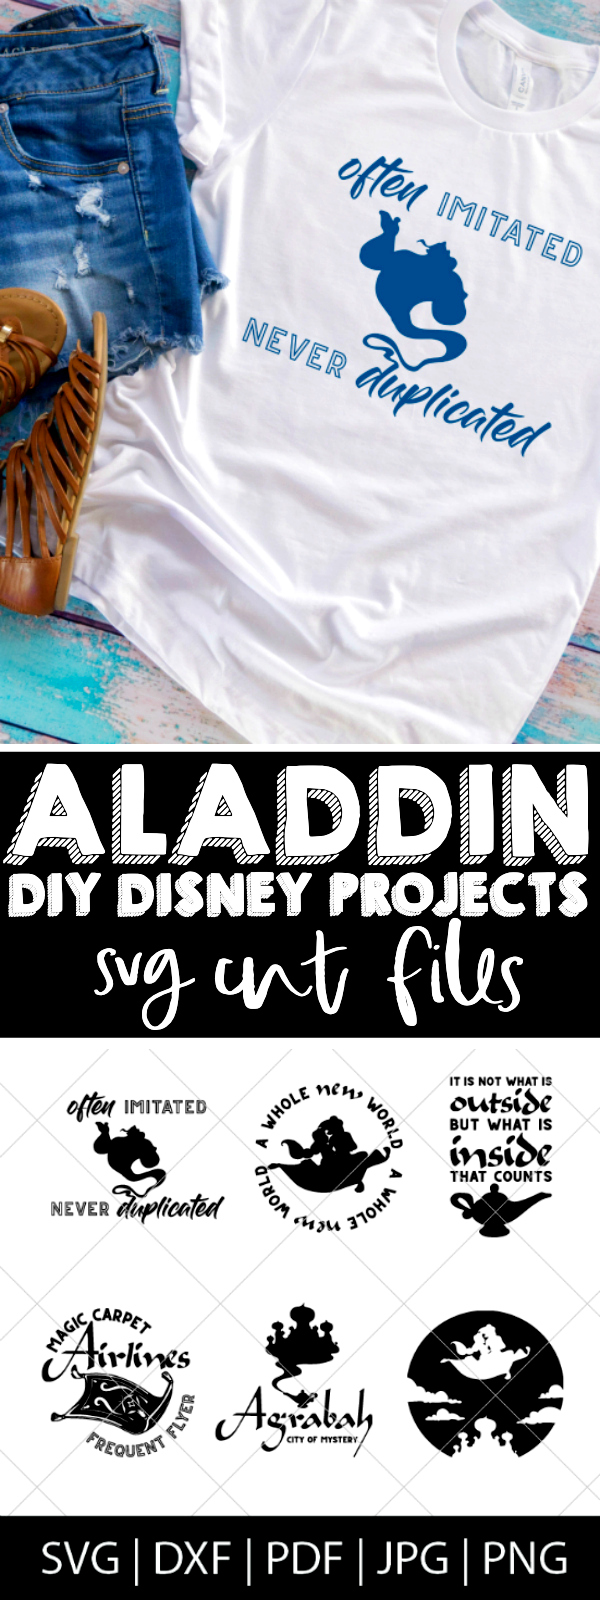 Who else loved Aladdin as a kid?! I'm excited for the new Disney live action Aladdin, so I made a new cut file bundle. Come check out our Aladdin SVG Bundle - perfect for making diy shirts for the movie theatre or Disney World as well as travel mugs, computer stickers and more! | THE LOVE NERDS #disneyshirt #disneyside #aladdinproject